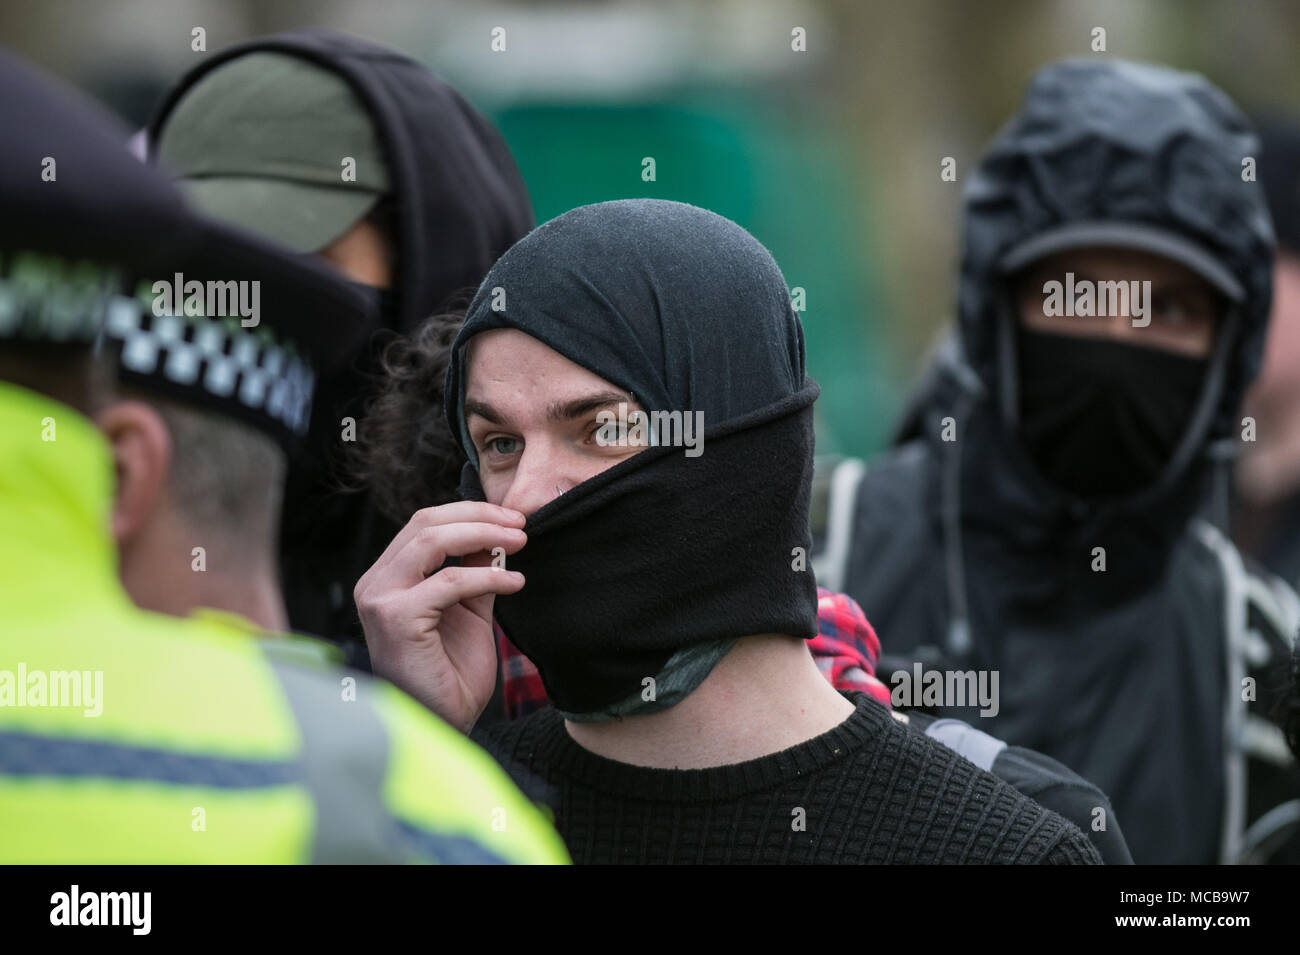 London, UK. 15th April, 2018. Anti-fascist counter-protesters. Nationalist members and supporters of the right-wing group Generation Identity gather in Hyde Park under heavy police supervision to hear a speech by a representative from the German women’s 120dB movement. Credit: Guy Corbishley/Alamy Live News Stock Photo